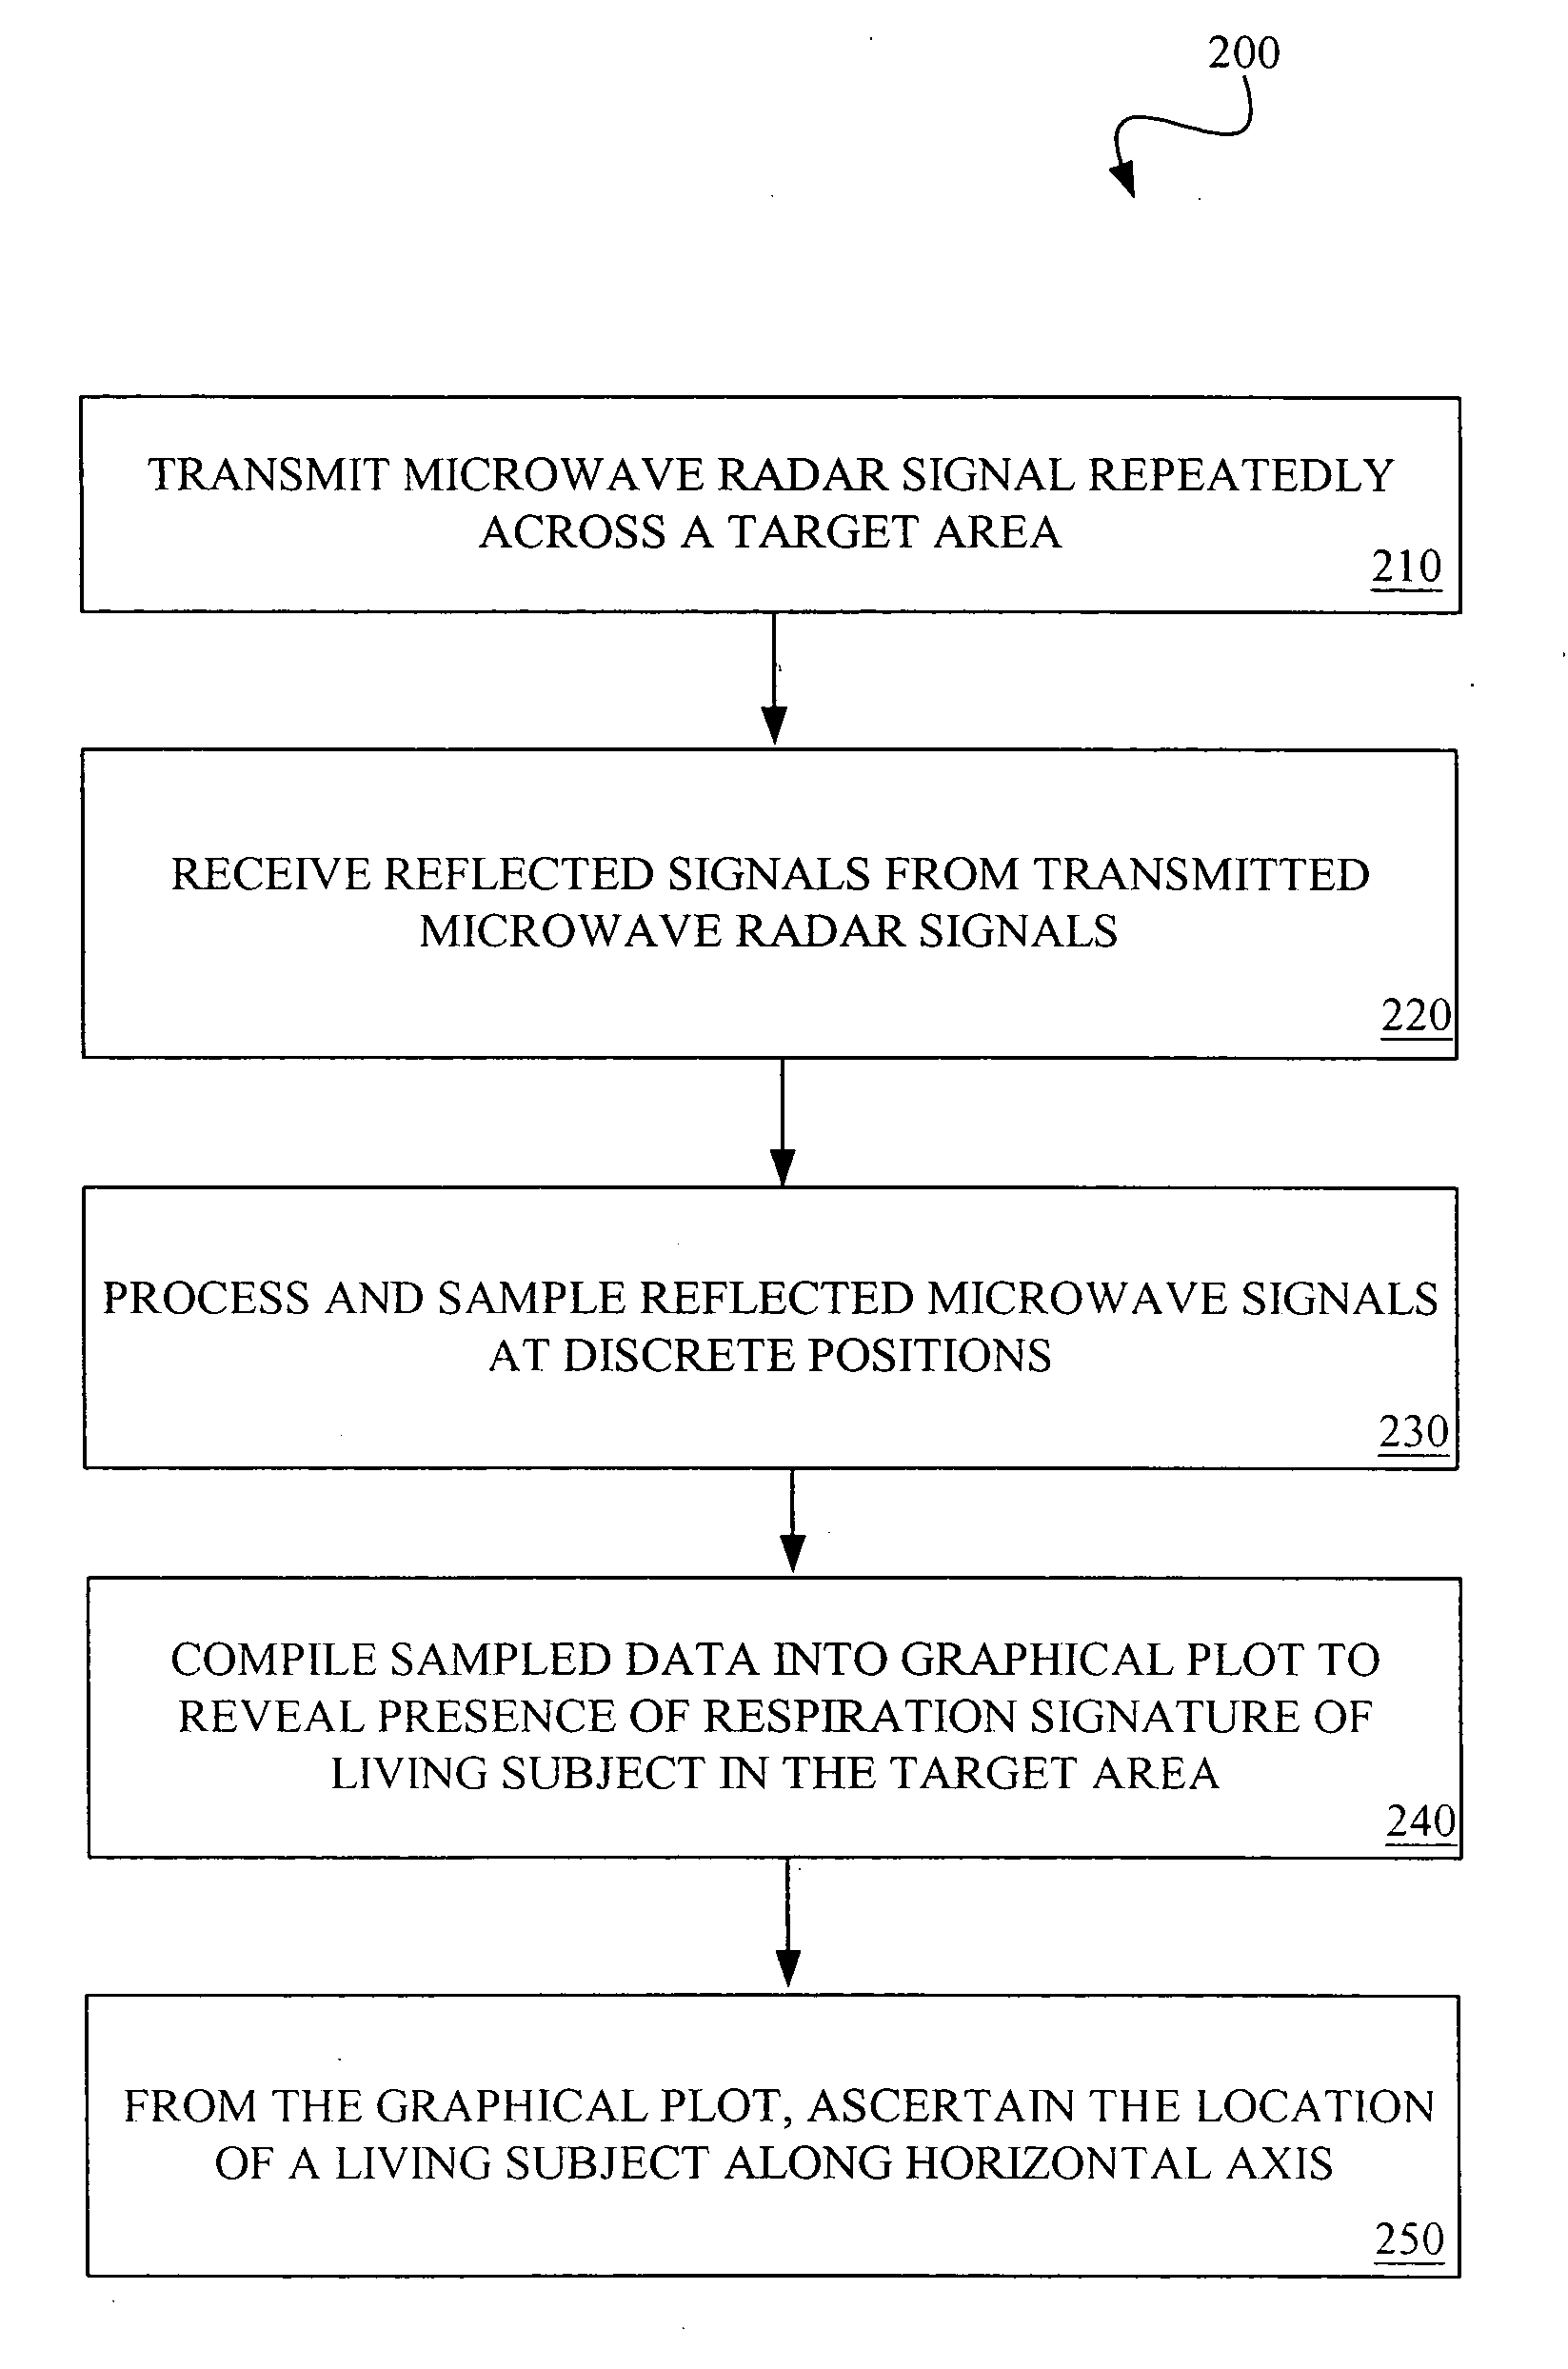 Radar detection device employing a scanning antenna system